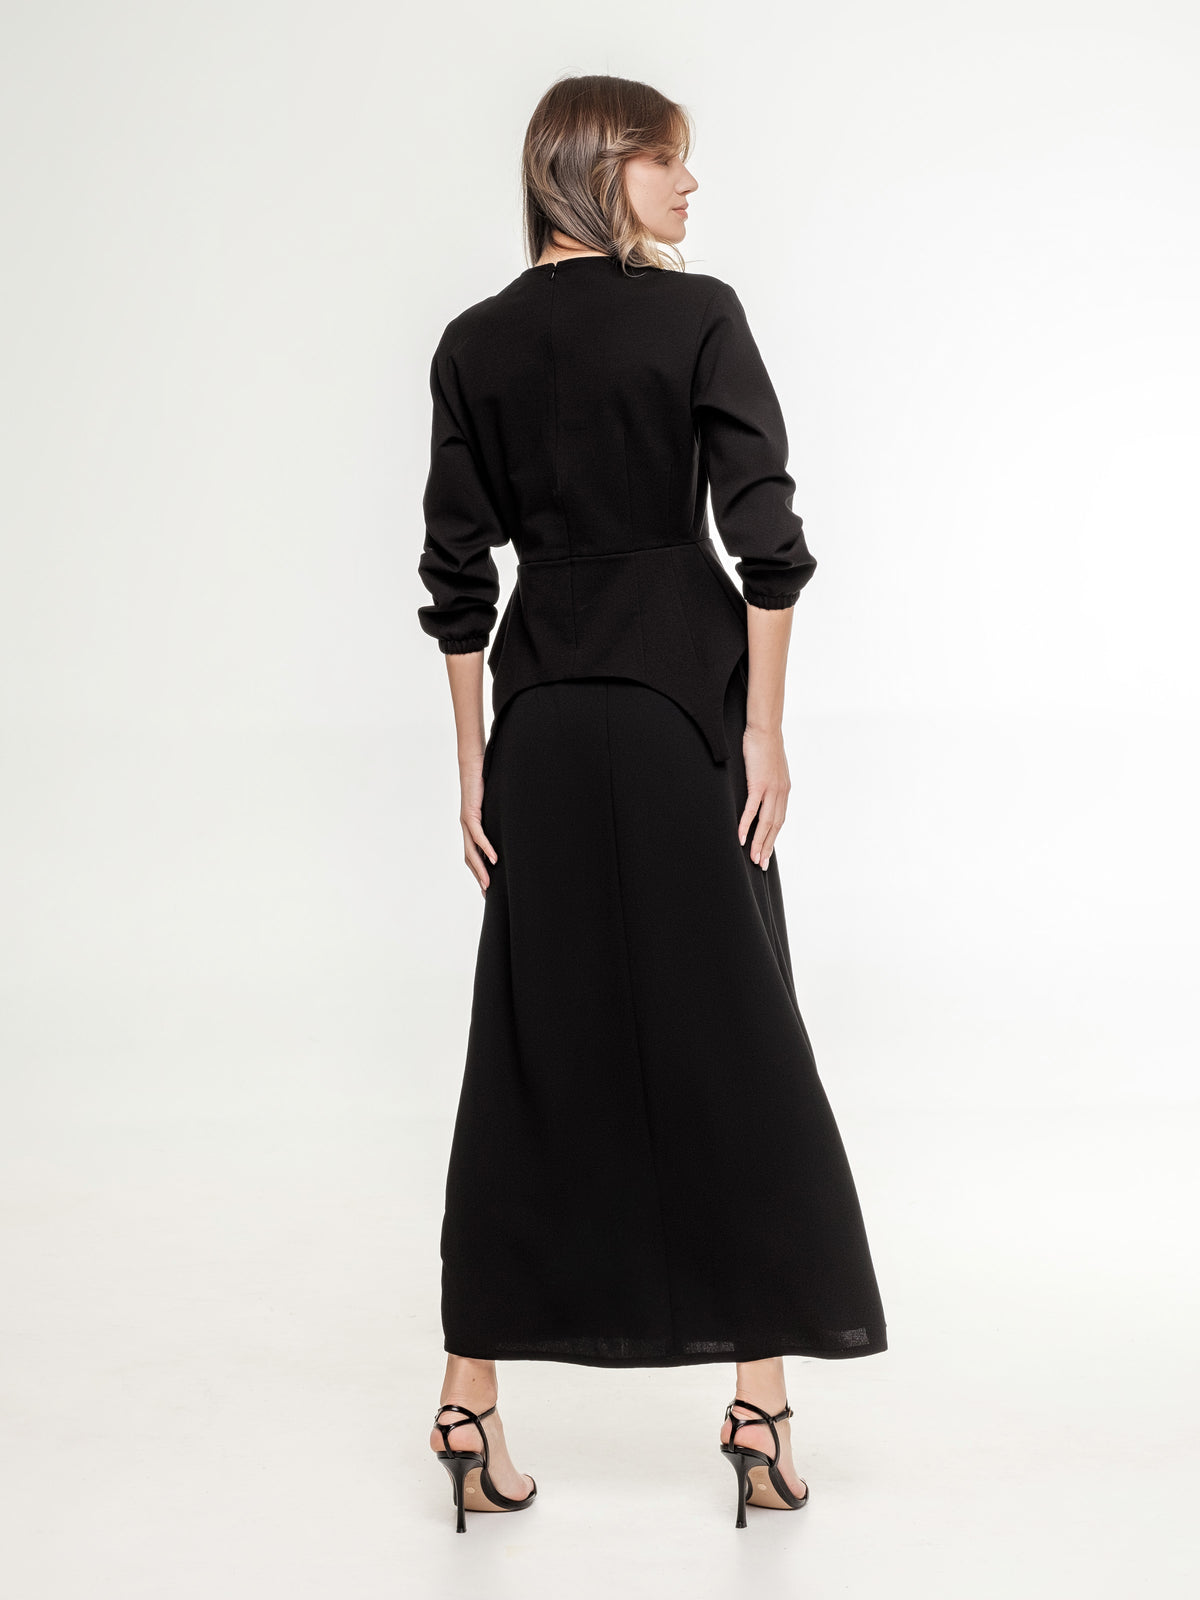 black set of top with long sleeves and long skirt from the back